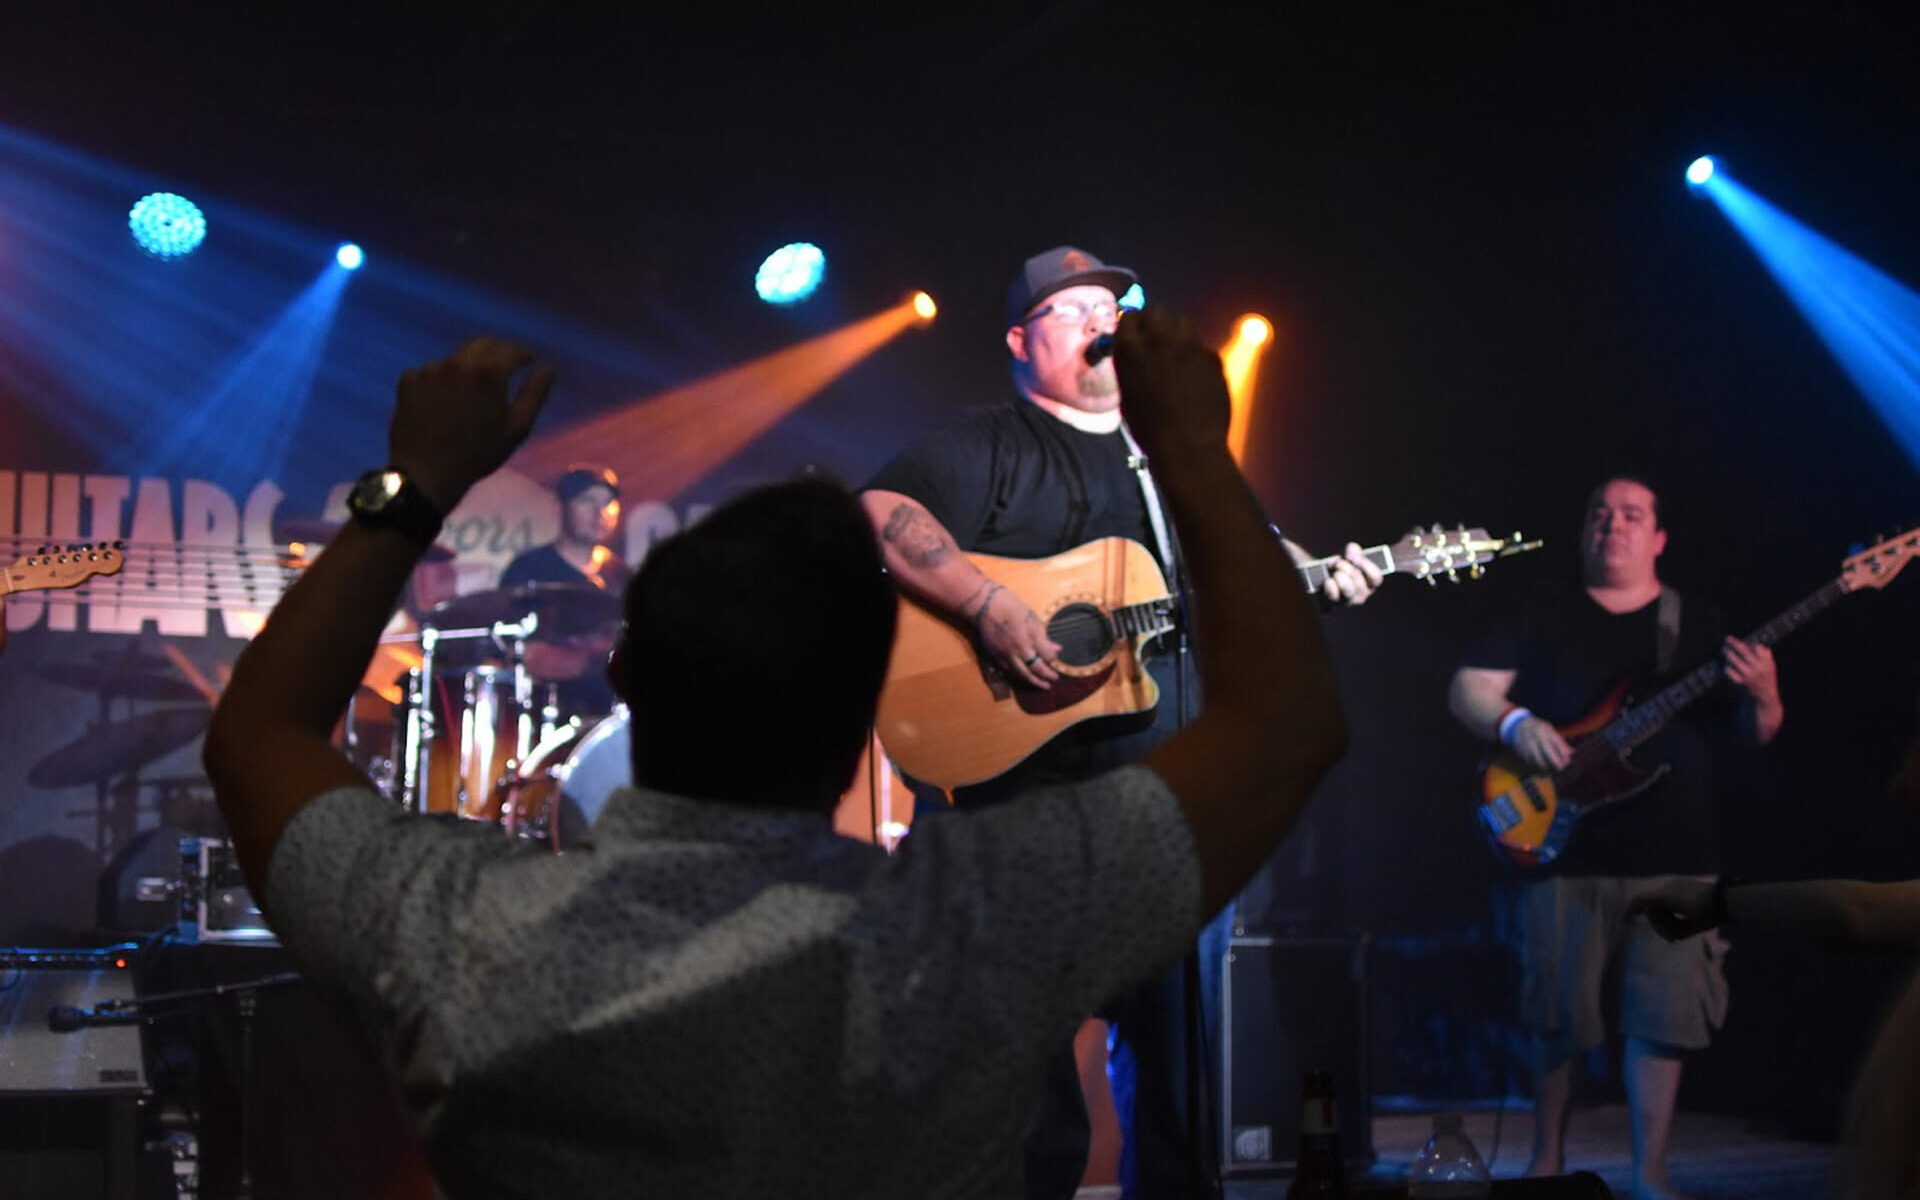 Experience the magic of a Jaron Bell live performance. On a dimly lit stage with vibrant stage lights, Jaron sings into a microphone while playing his guitar. A thrilled fan in the second row raises their hands in joy, surrounded by the band members in the background. The energy of the moment is palpable.